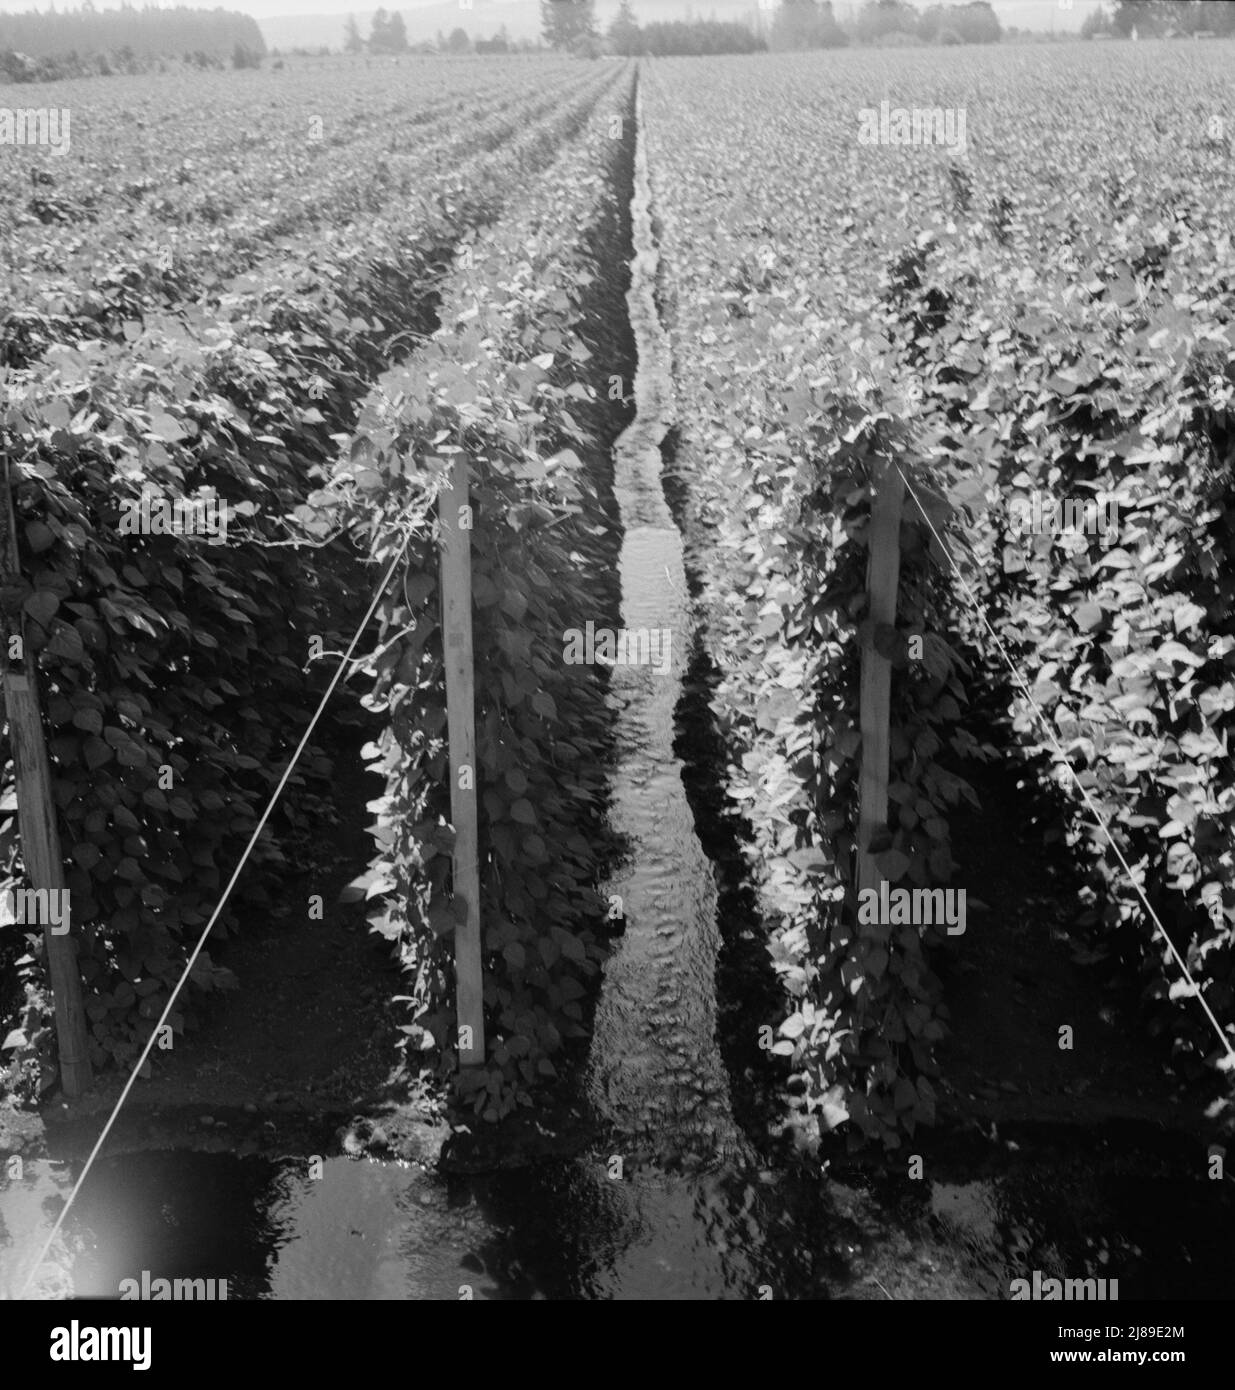 [Untitled, possibly related to: Oregon, Marion County, near West Stayton. Beanfield showing irrigation. Stock Photo